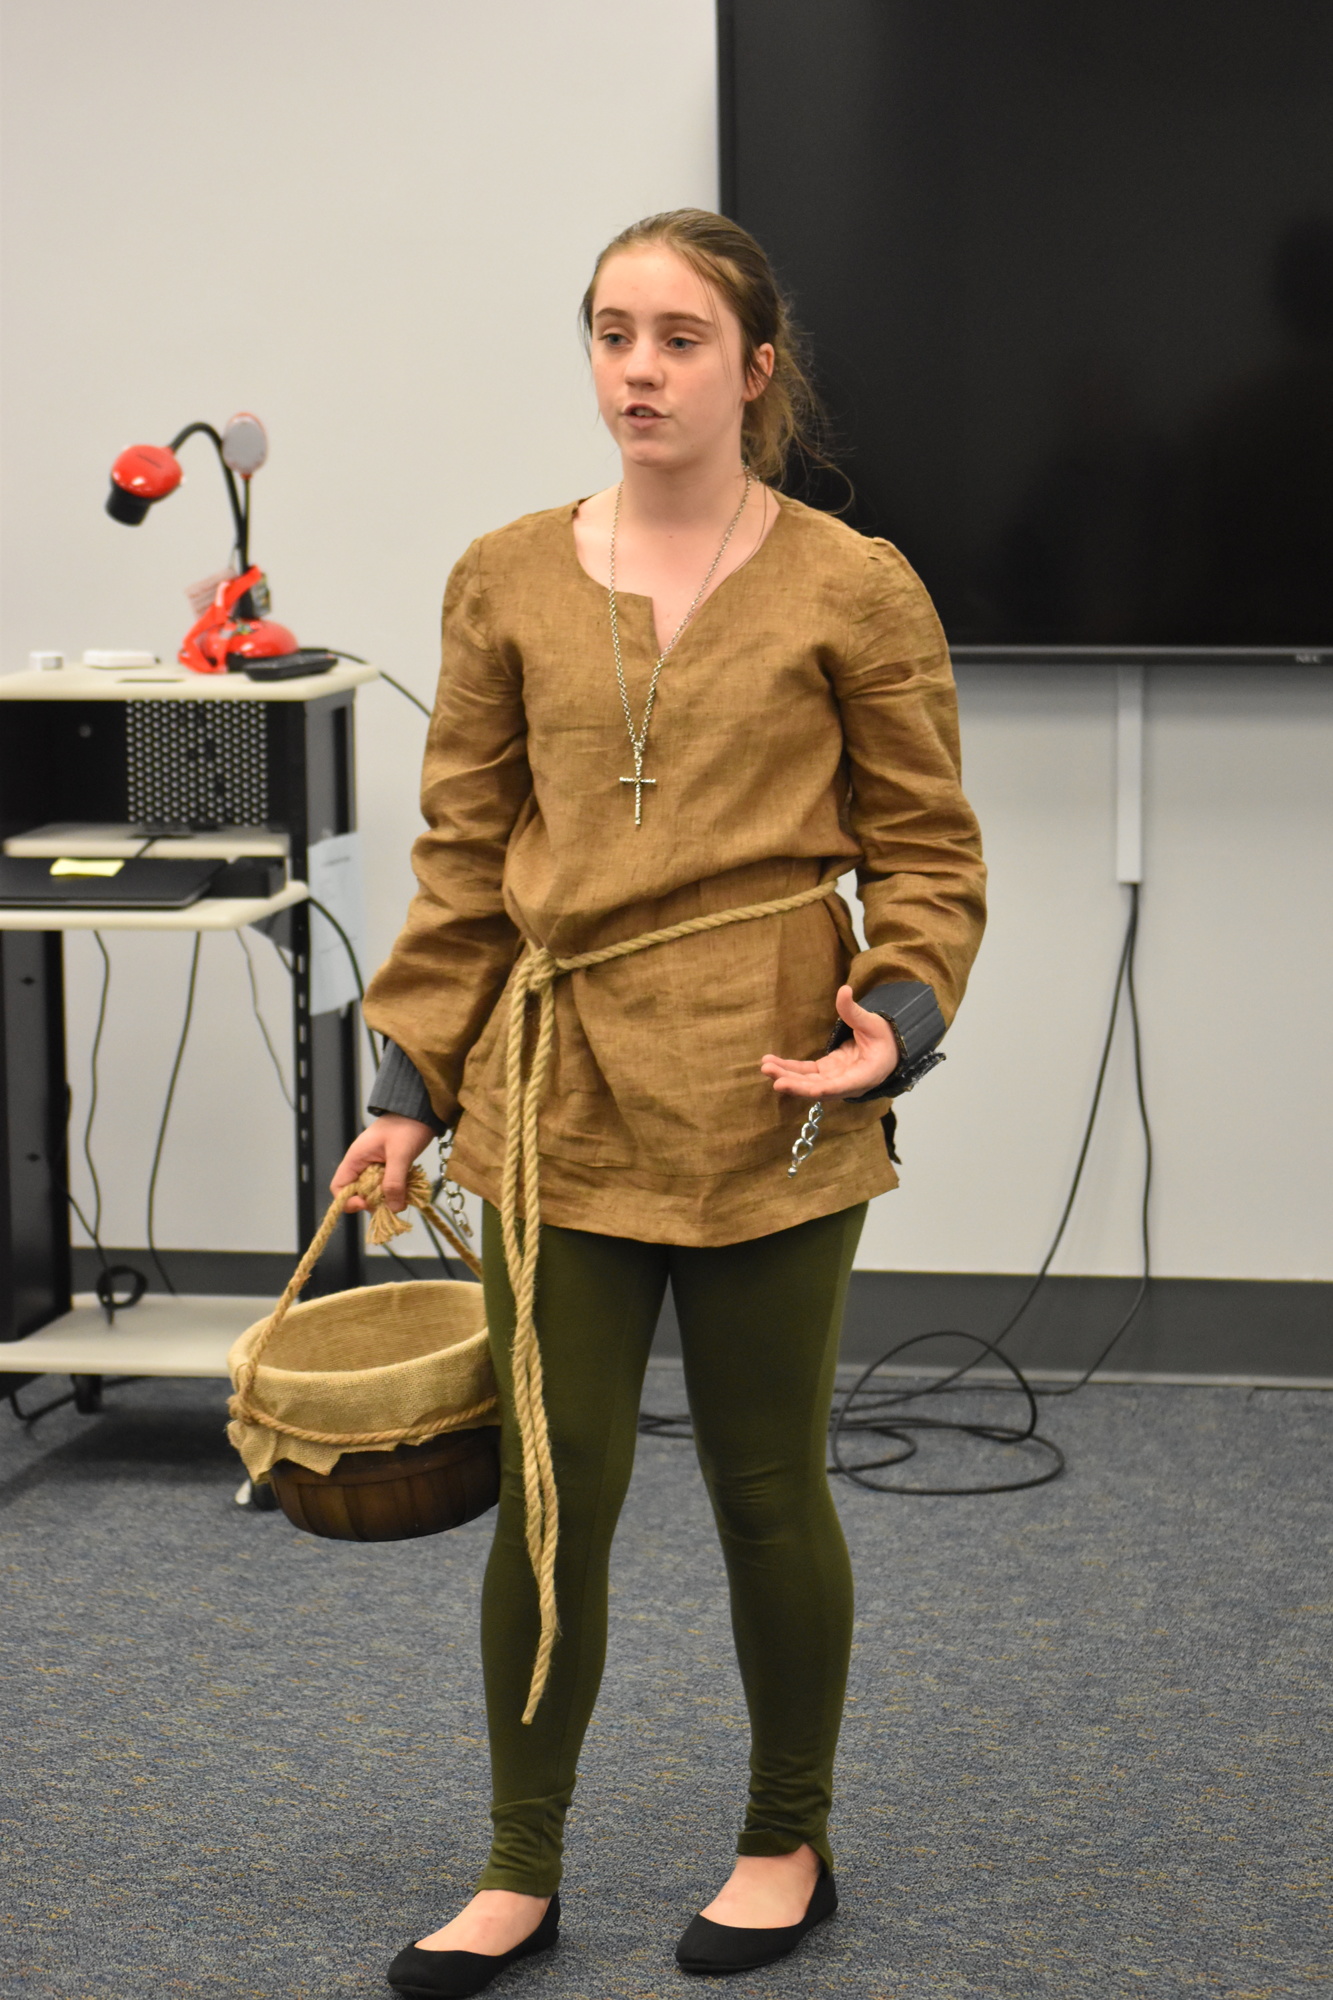 Siena Cook performs her self-written monologue about Joan of Arc.